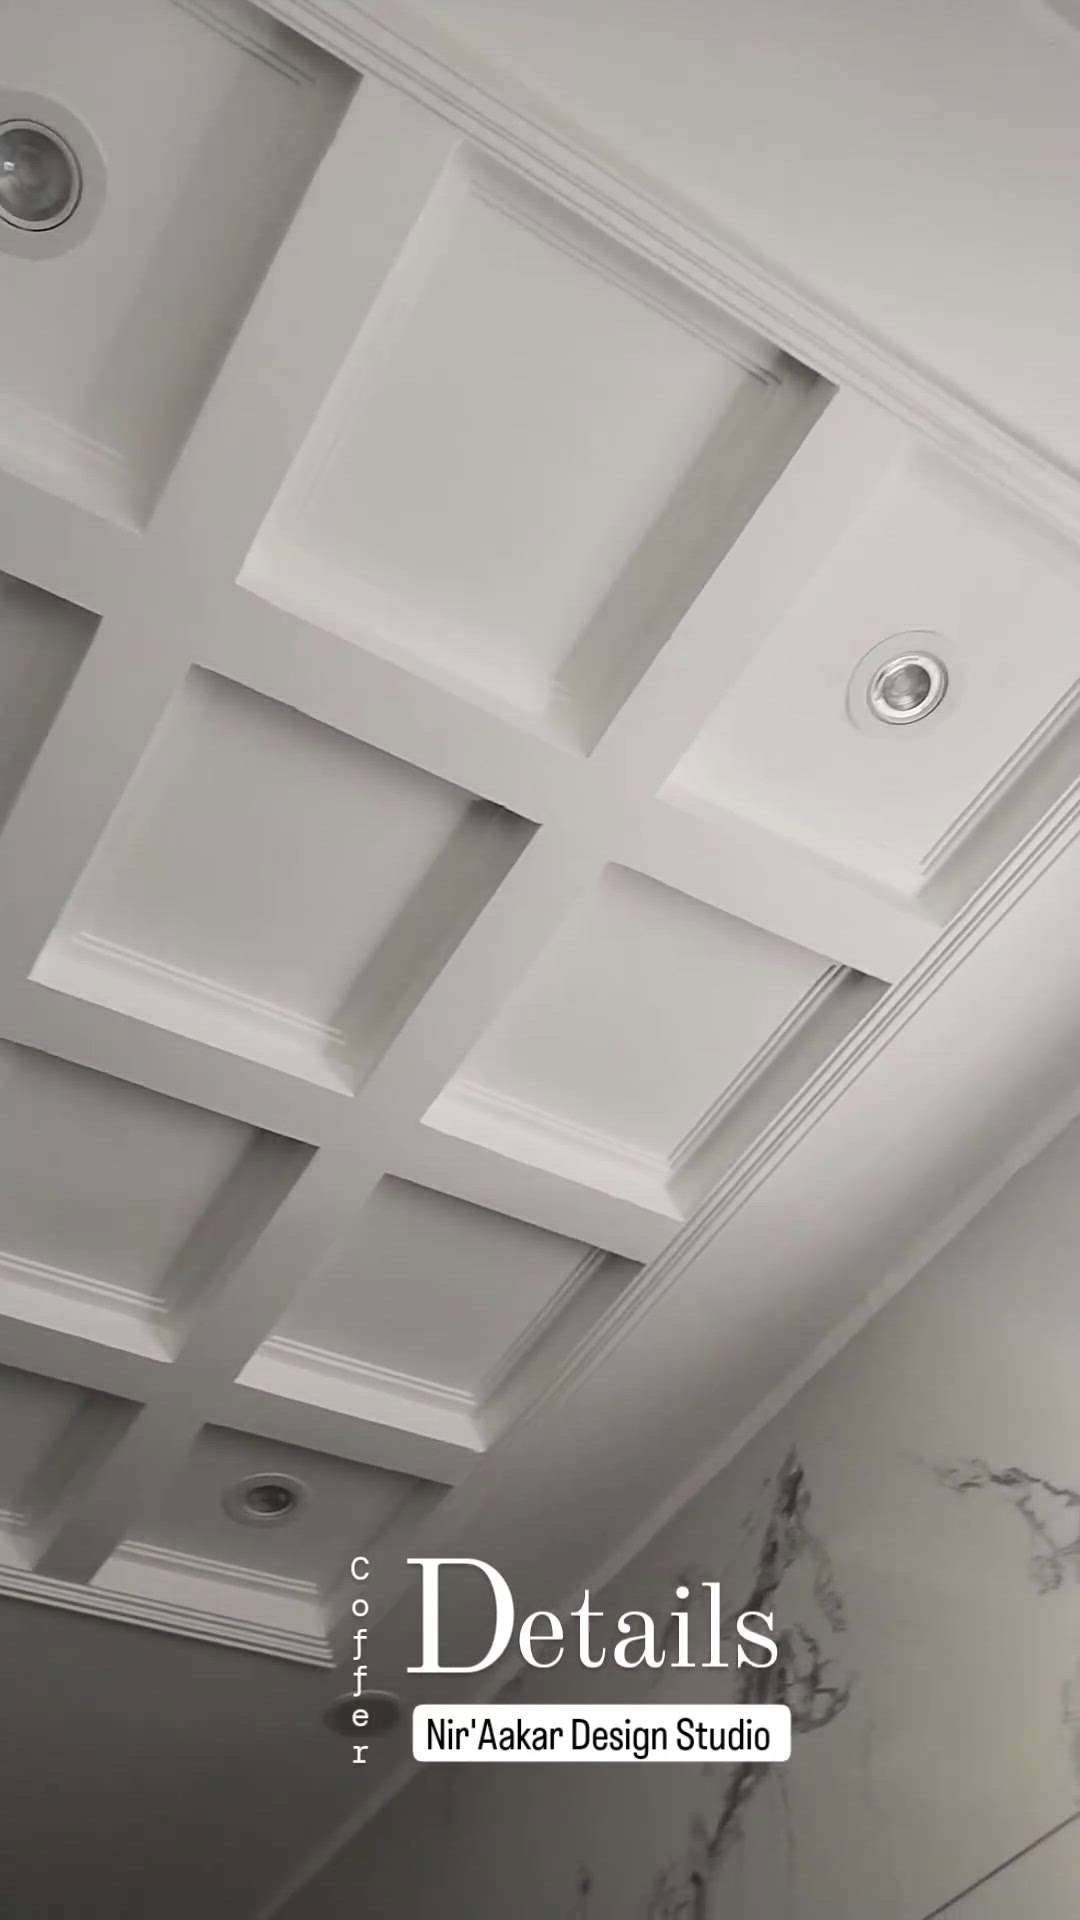 "Ceiling Deets"

Design Courtesy: Nir'Aakar Design Studio
Led by: Ar. Sarika Aggarwal

Follow us on Instagram for all new updates and queries! https://www.instagram.com/niraakar_design_studio?igsh=MTl3MTV3cDU5N2p6Ng==
.
.
.
#GridCeiling #FalseCeiling #falseceilingdesign #falseceilingideas #ceilingdesign #LUXURY_INTERIOR #InteriorDesigner #interiordesign  #trendingdesign #latestinteriordesign #foryou #exploremore